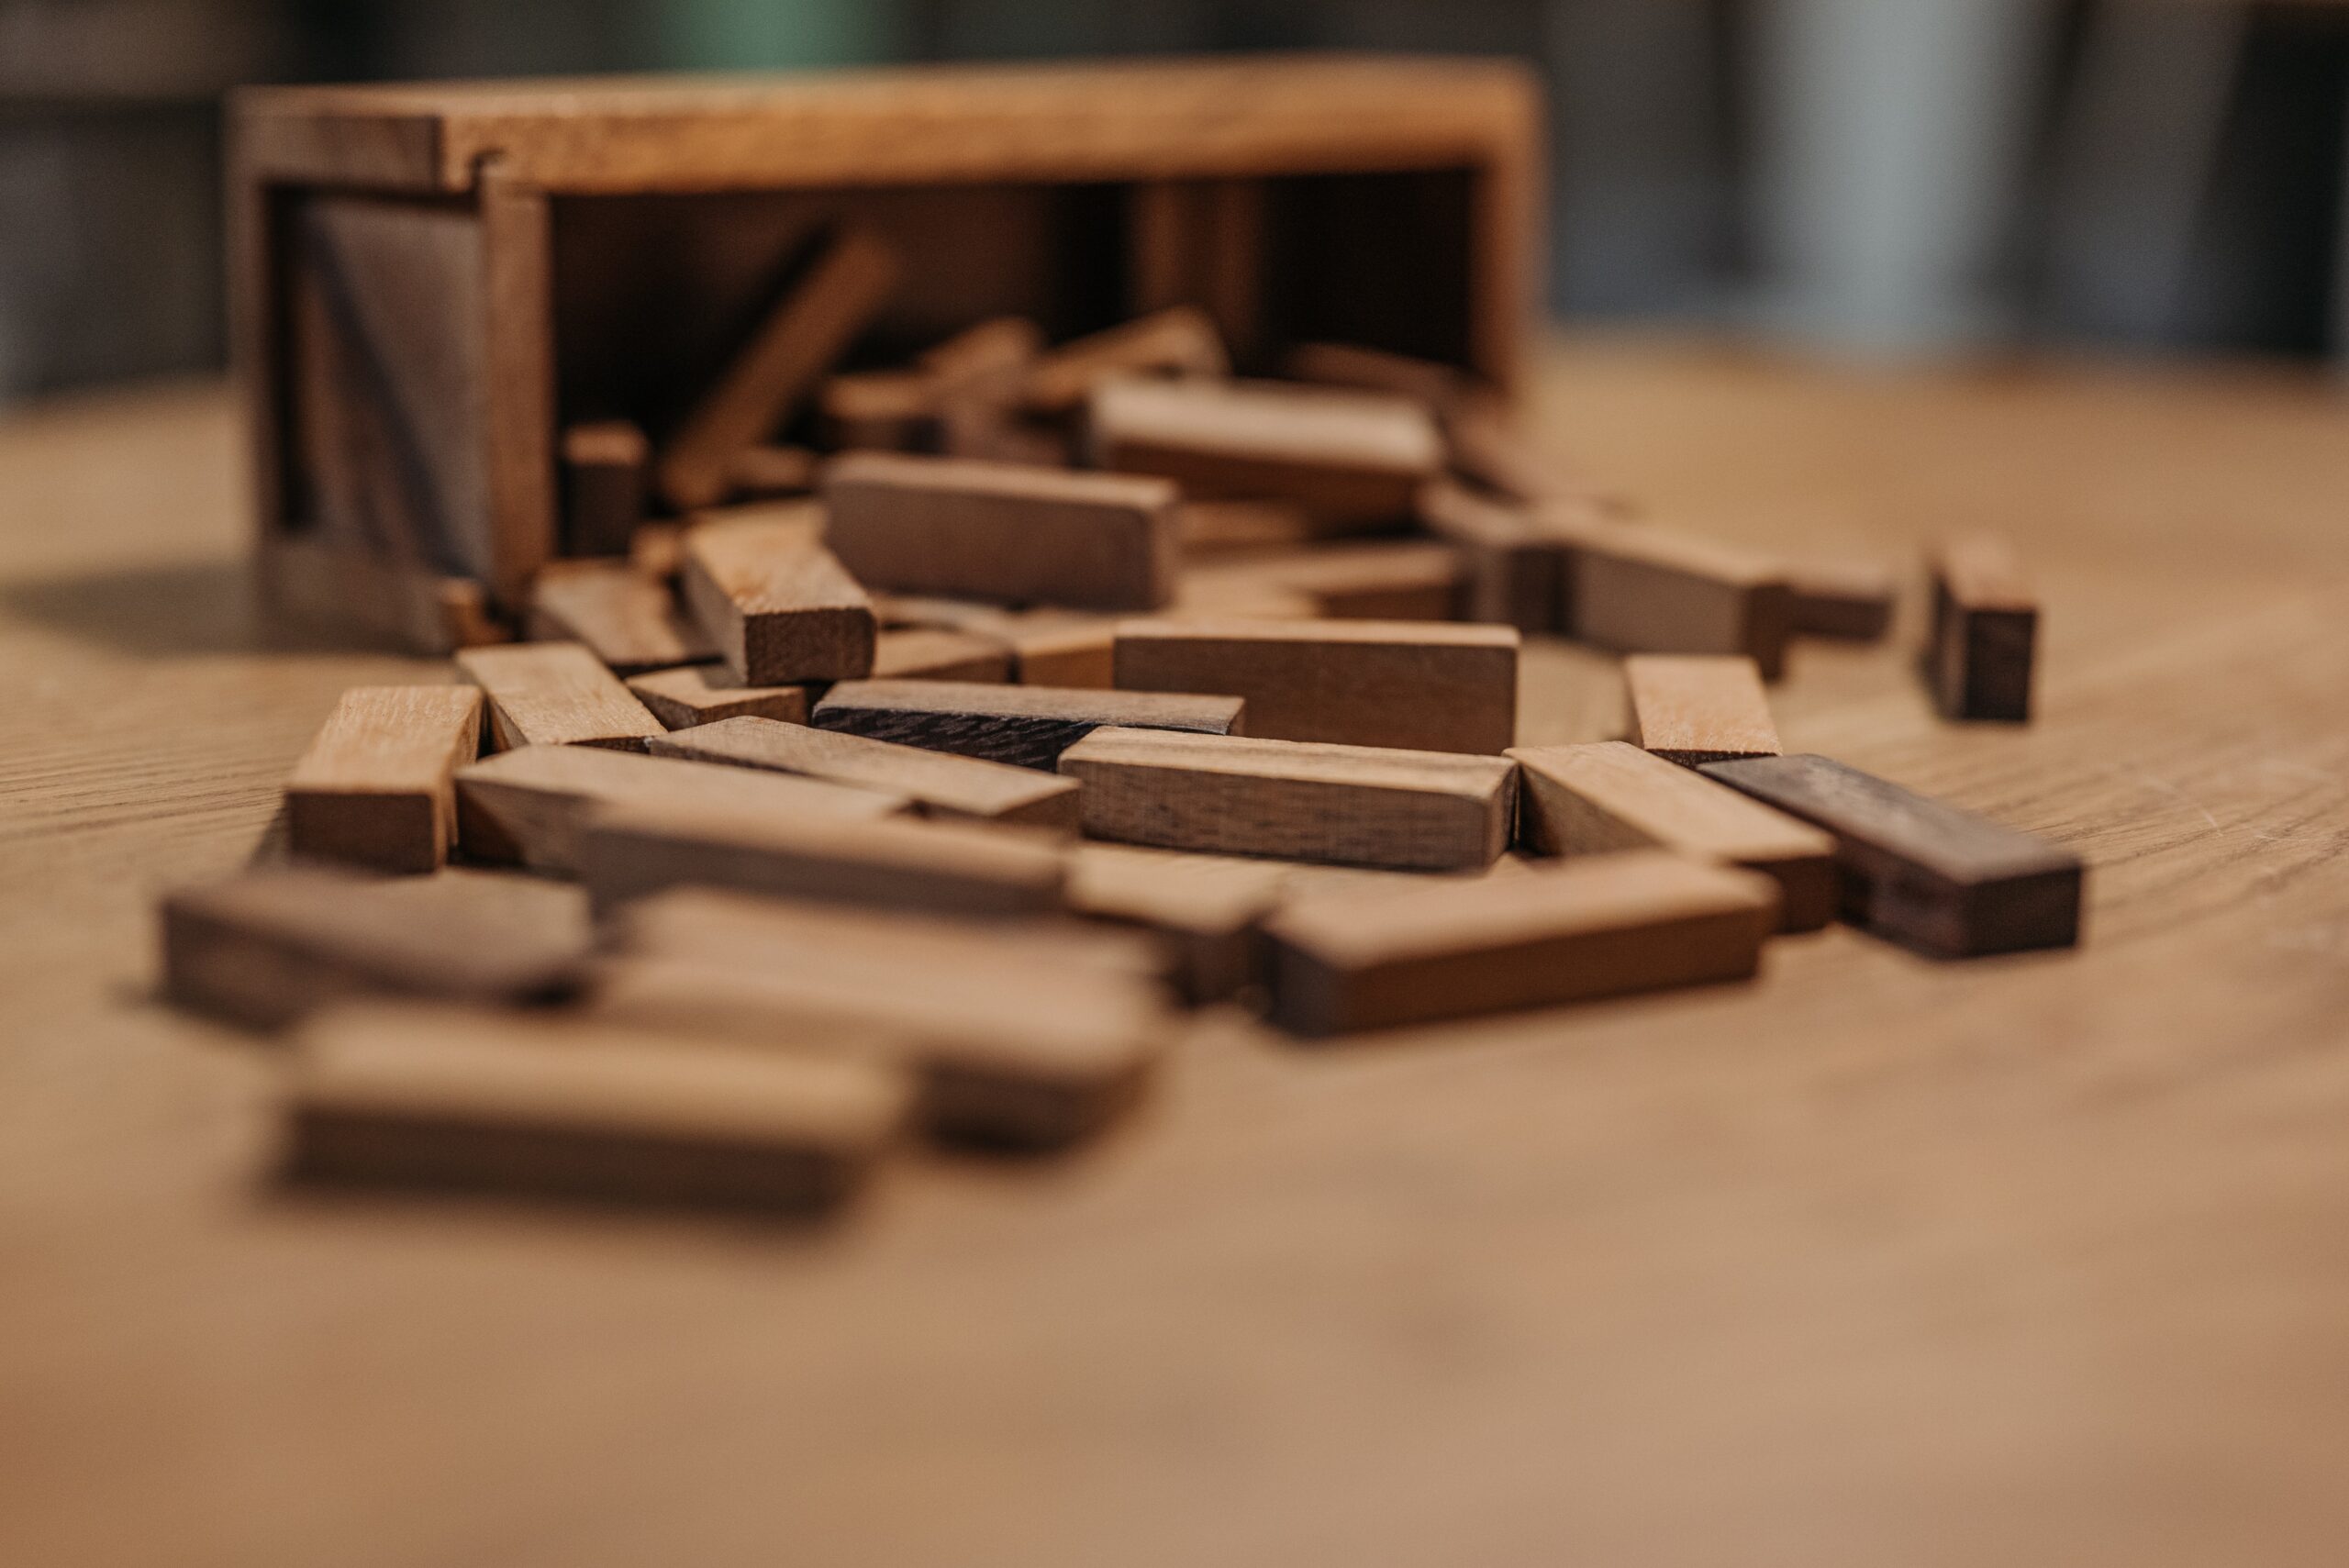 Wooden blocks falling representing parenting orders in the context of family violence